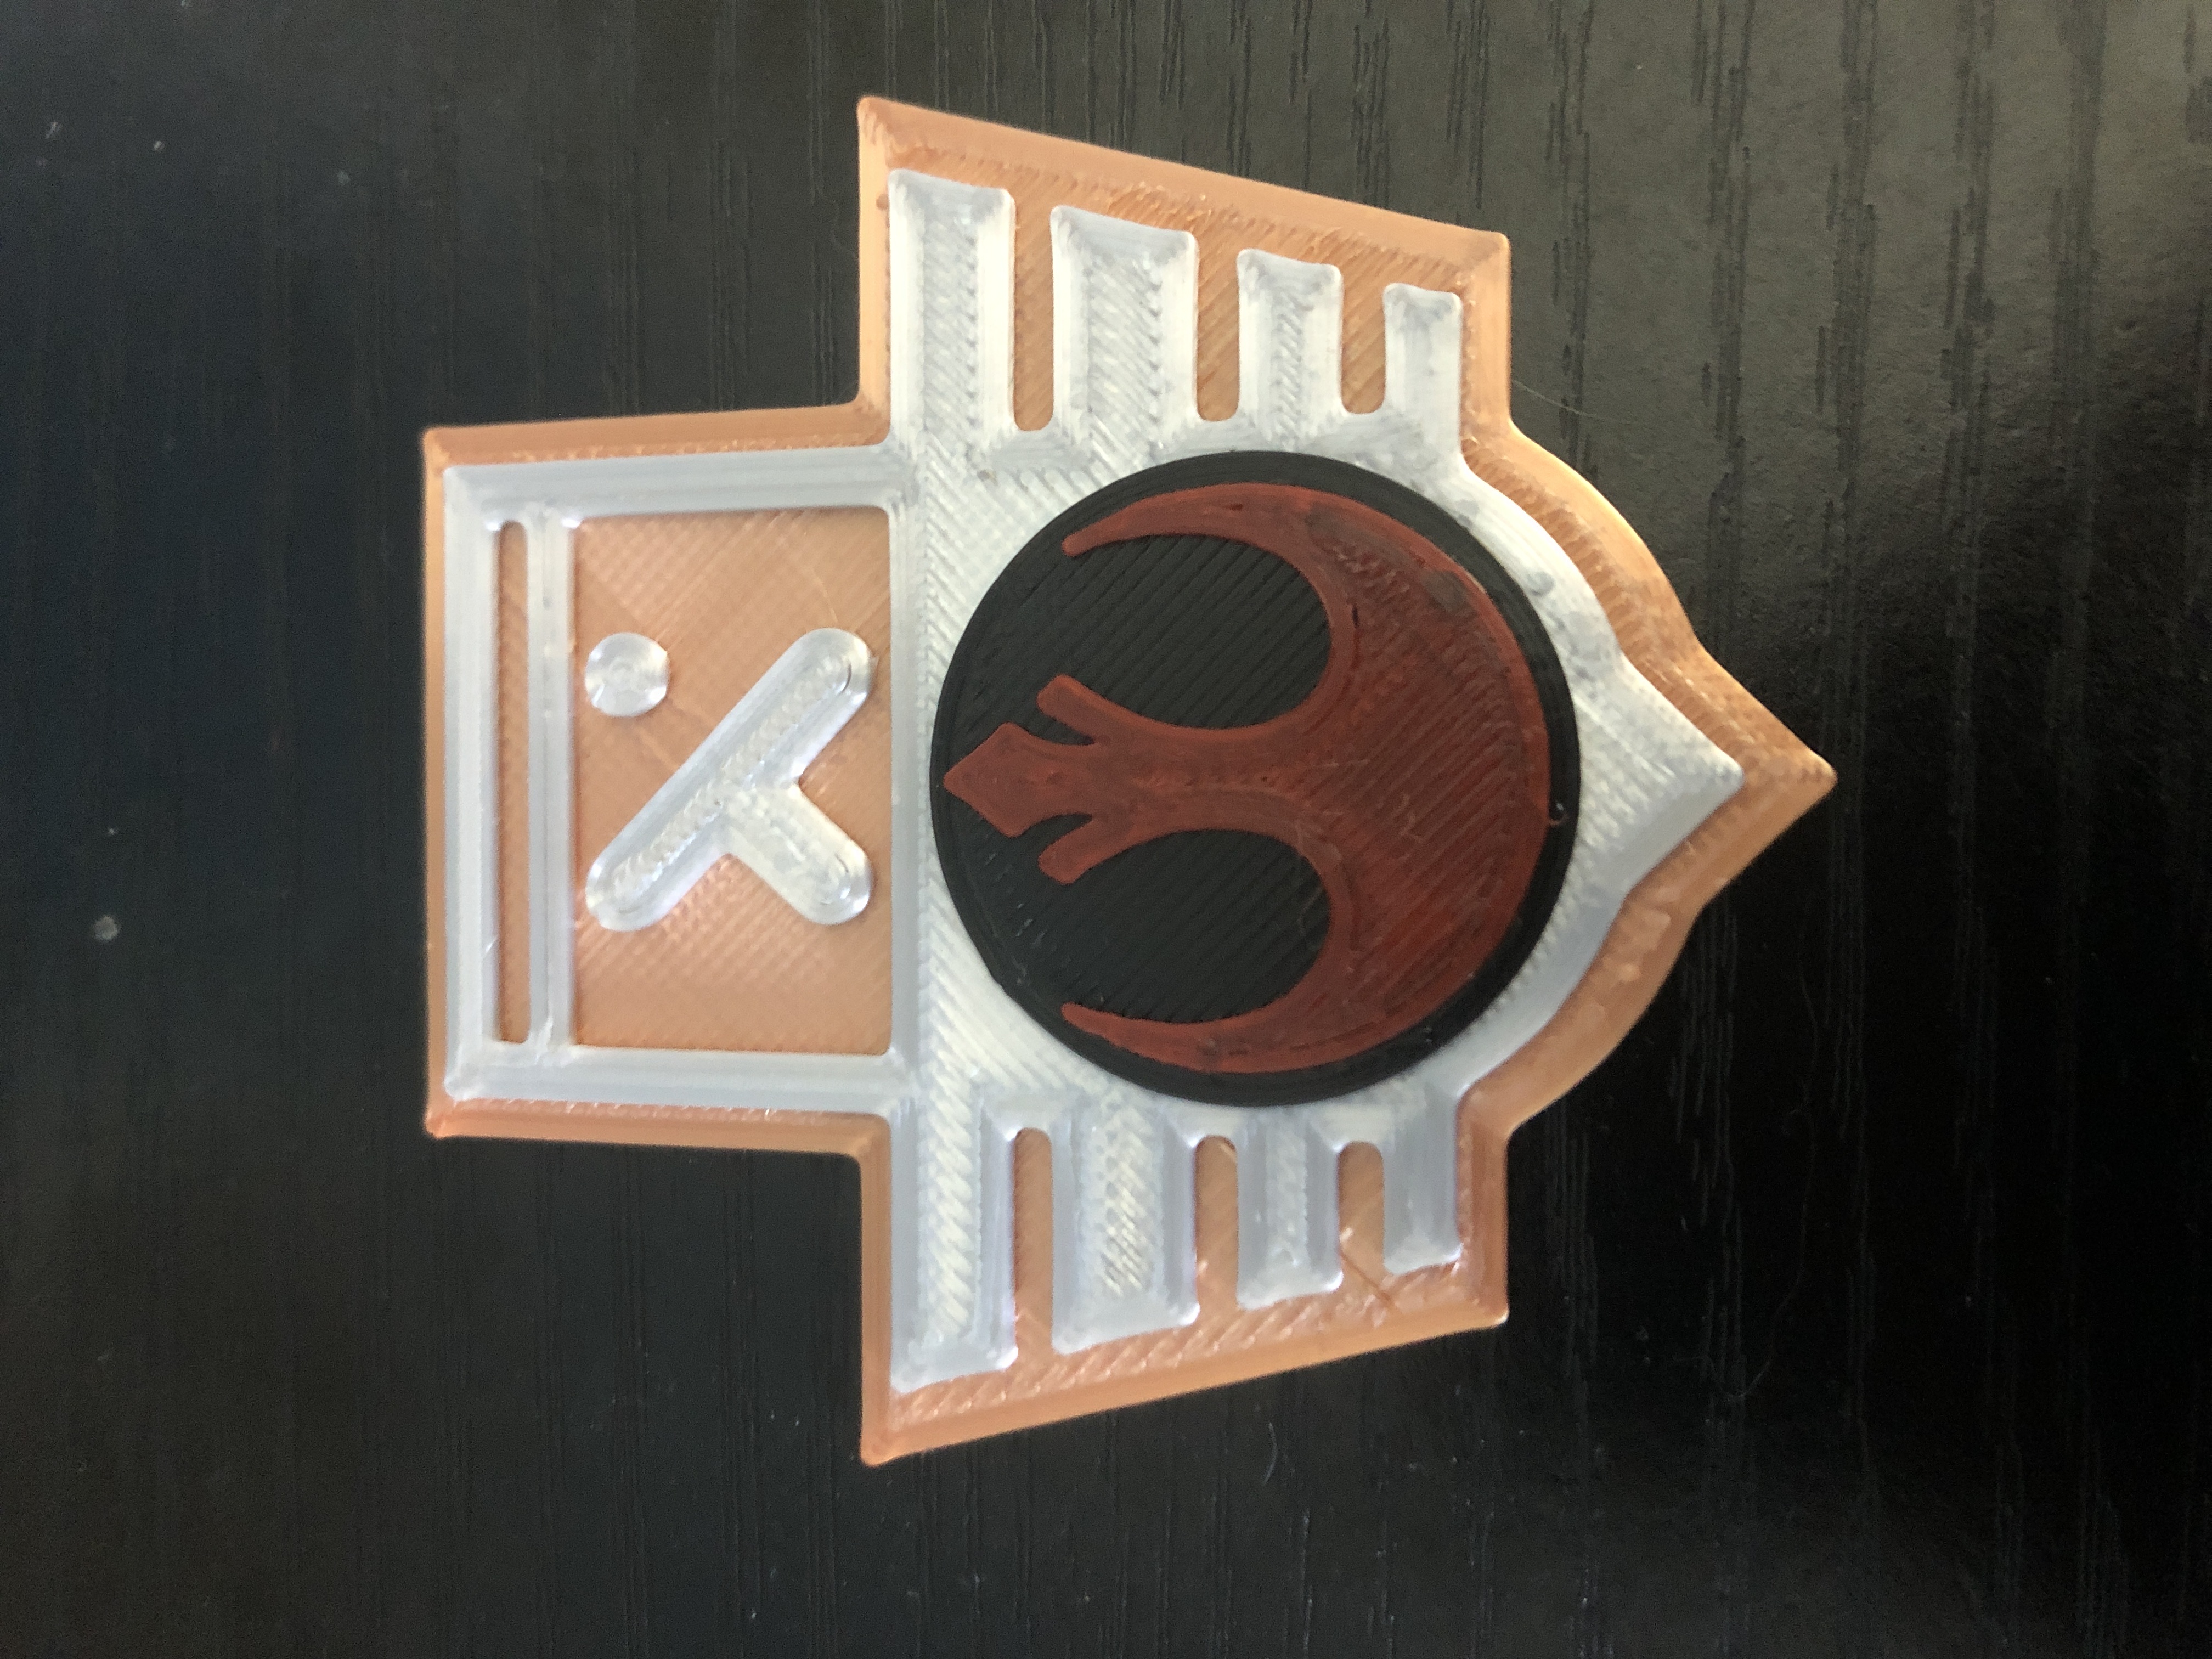 Resistance Rank Badges (Official Rank Insignias)